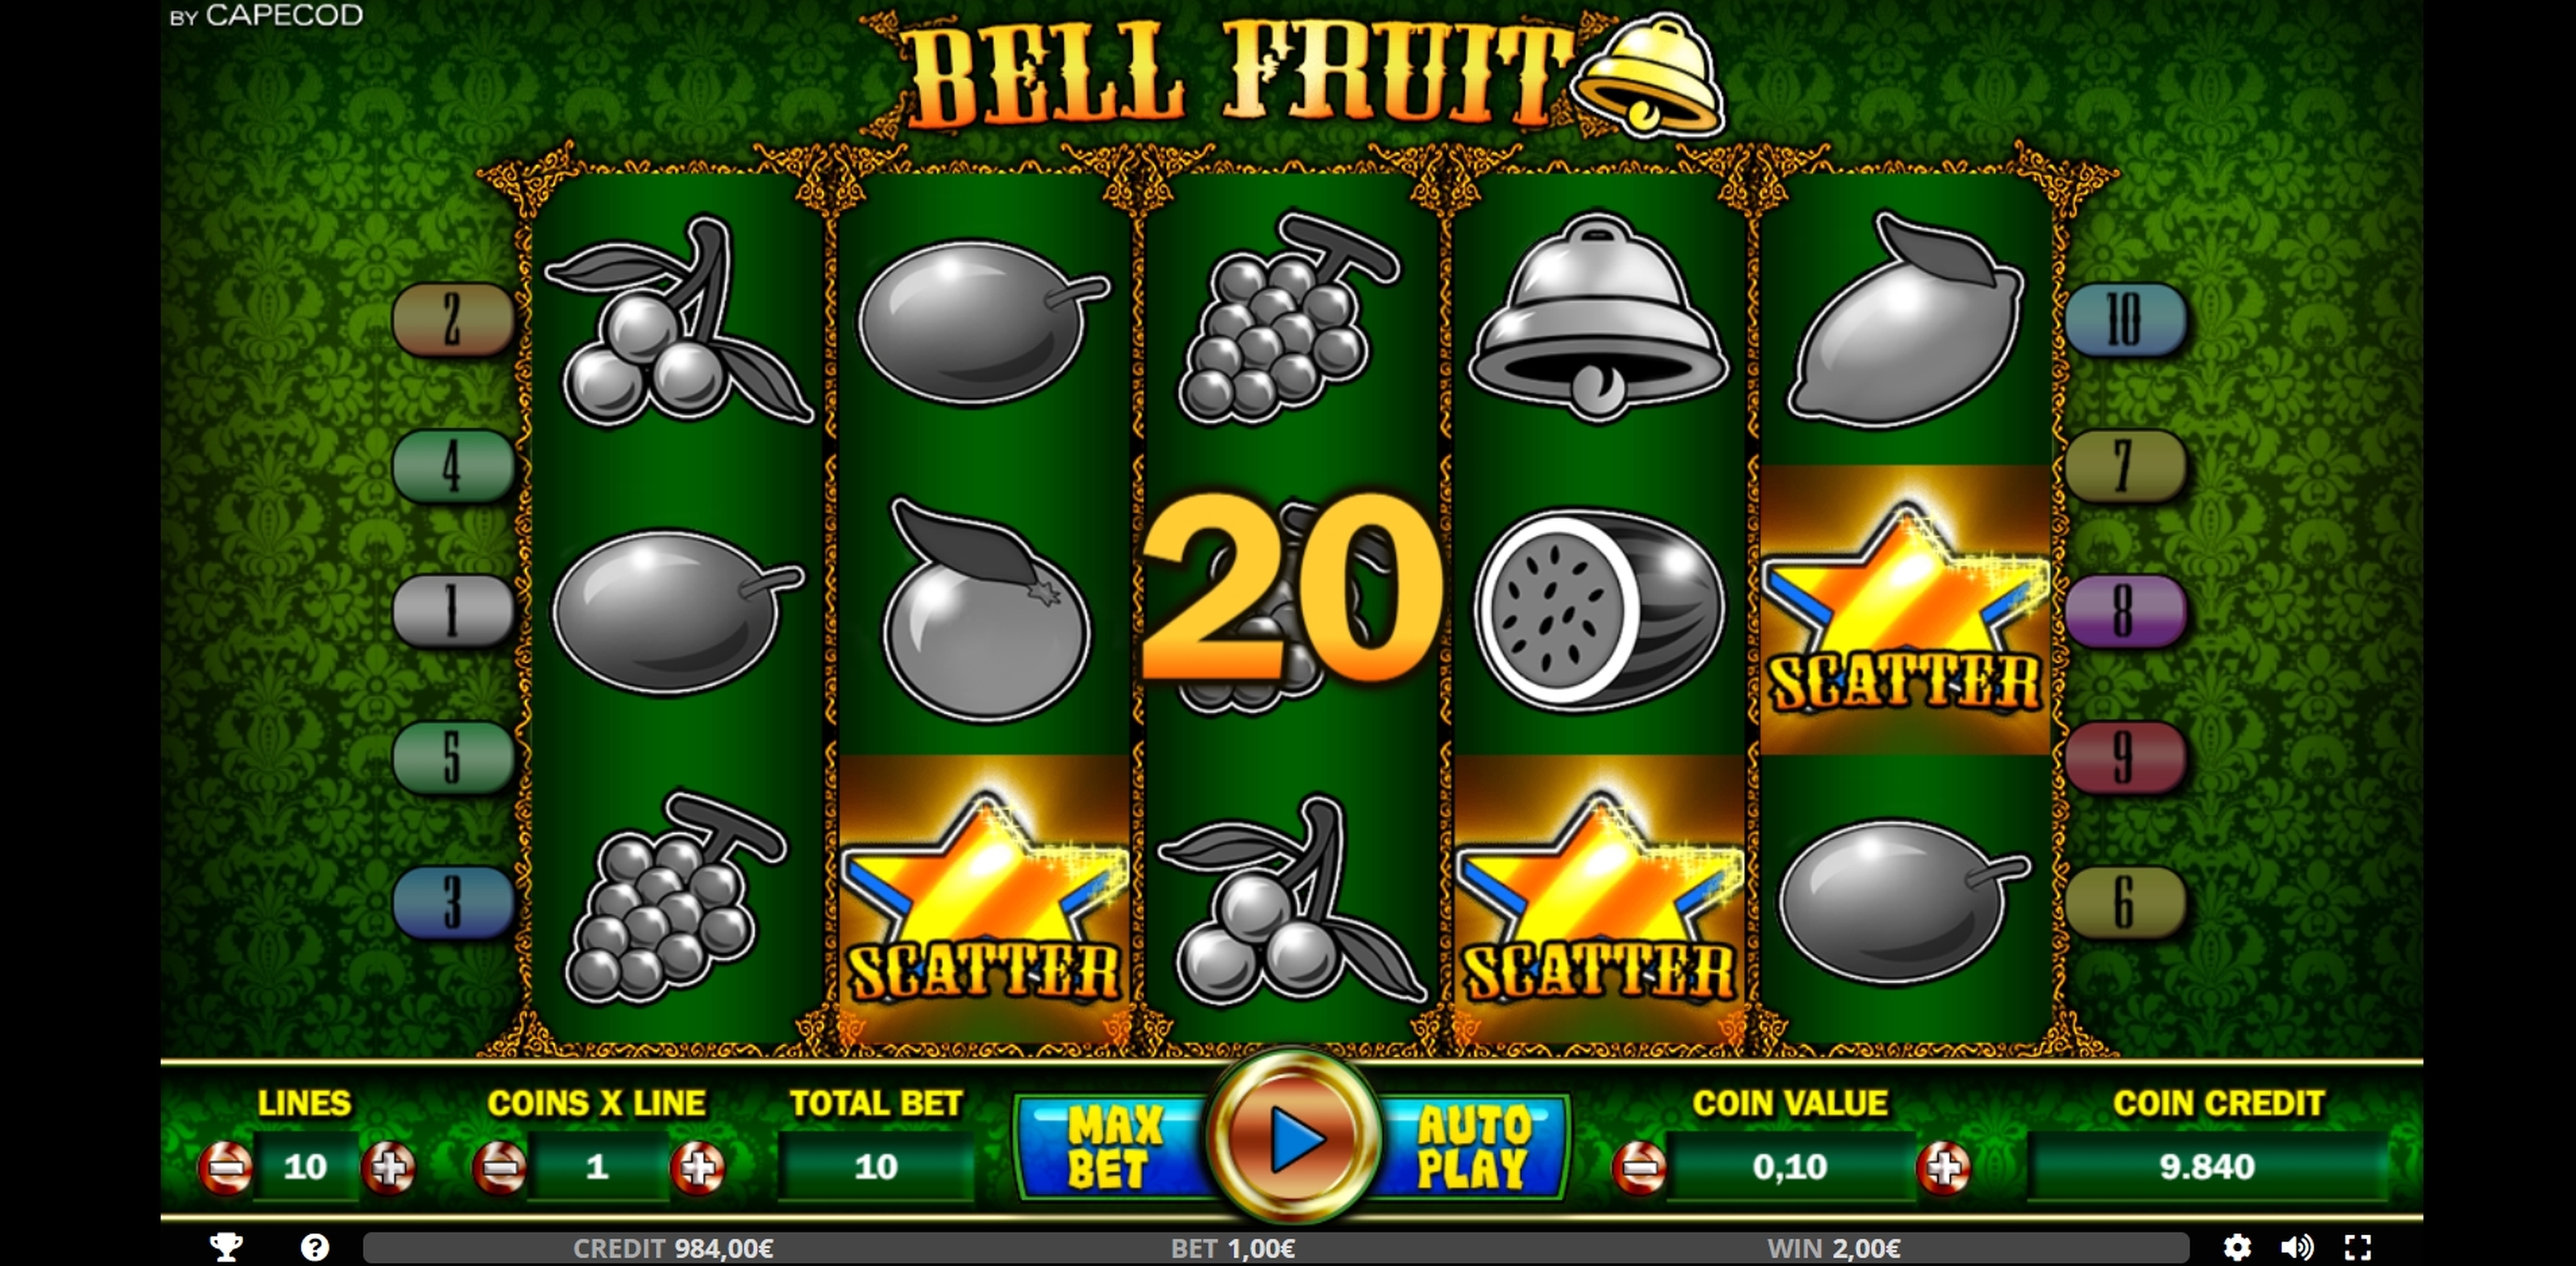 Win Money in Bell Fruit Free Slot Game by Capecod Gaming